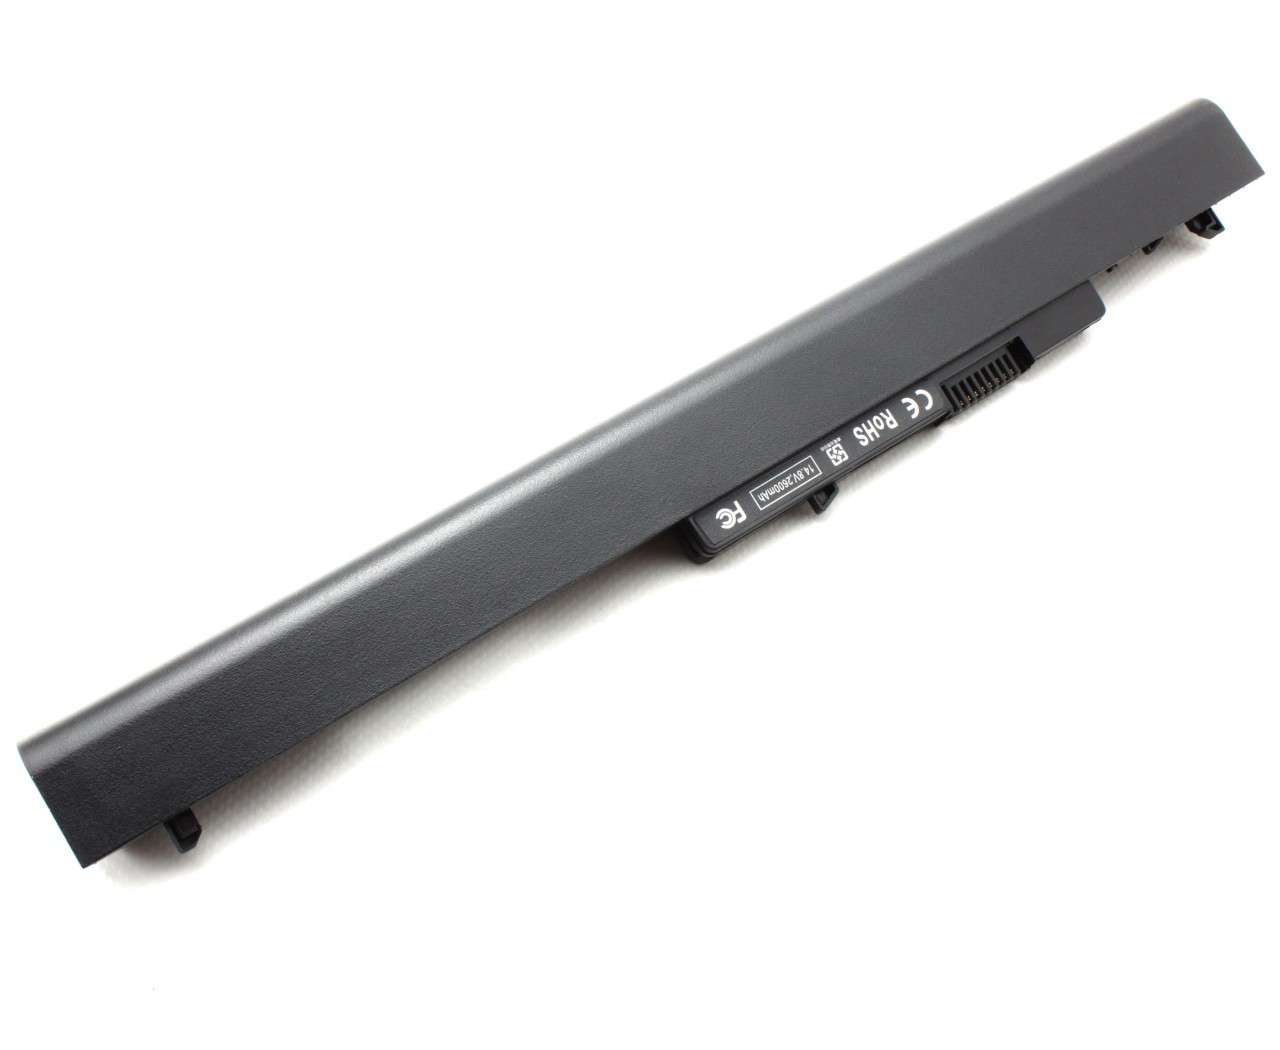 Baterie HP 15-A002SF Protech High Quality Replacement